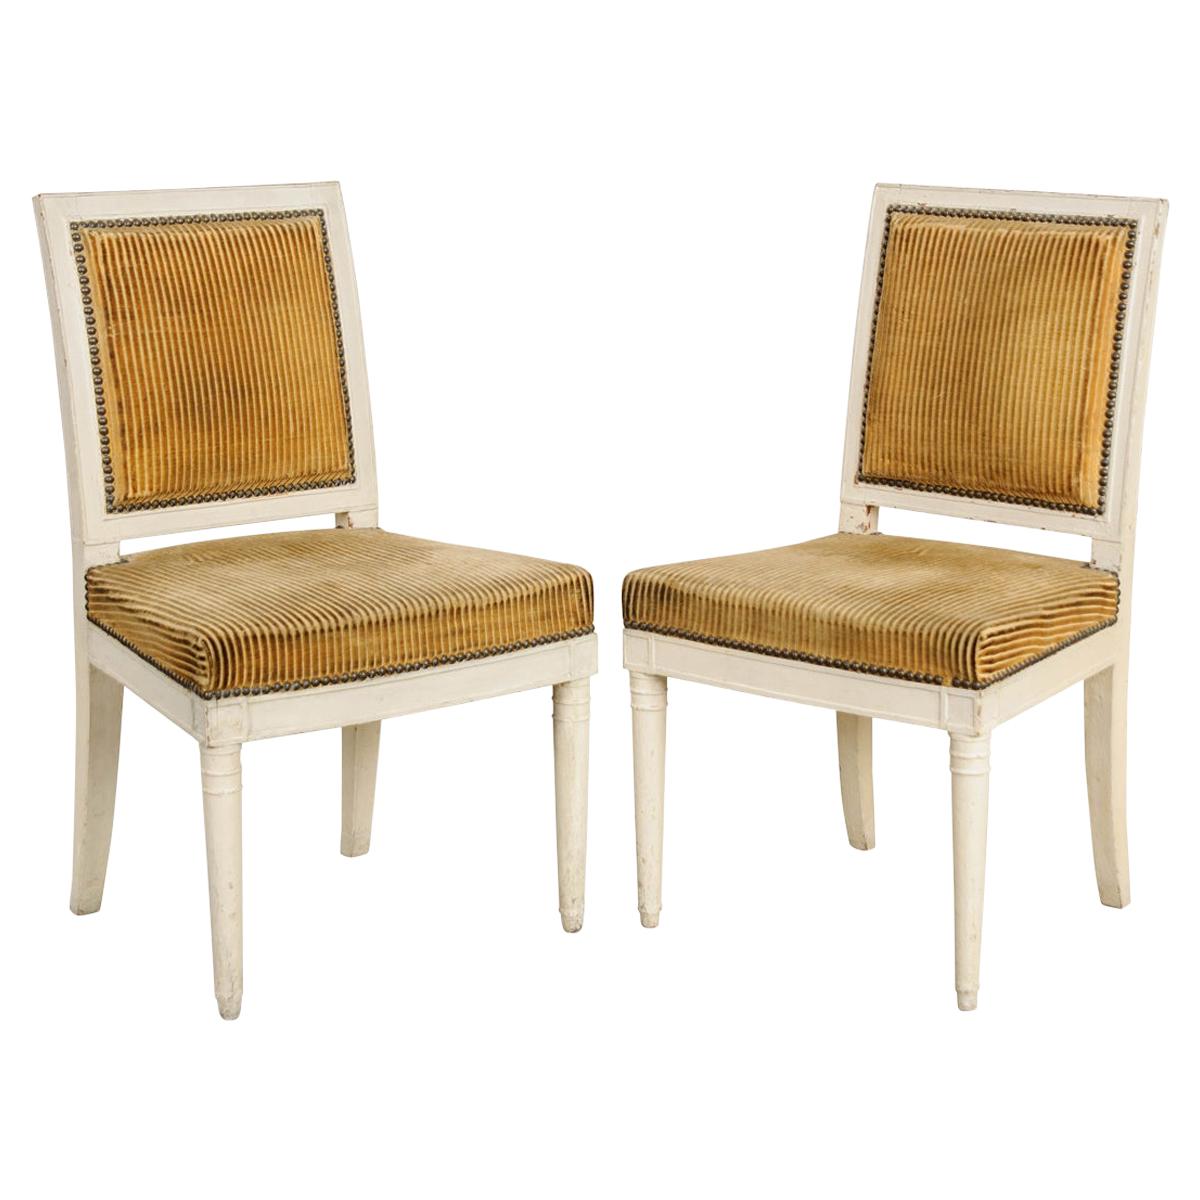 Pair of French 18th Century Directoire Painted Chairs